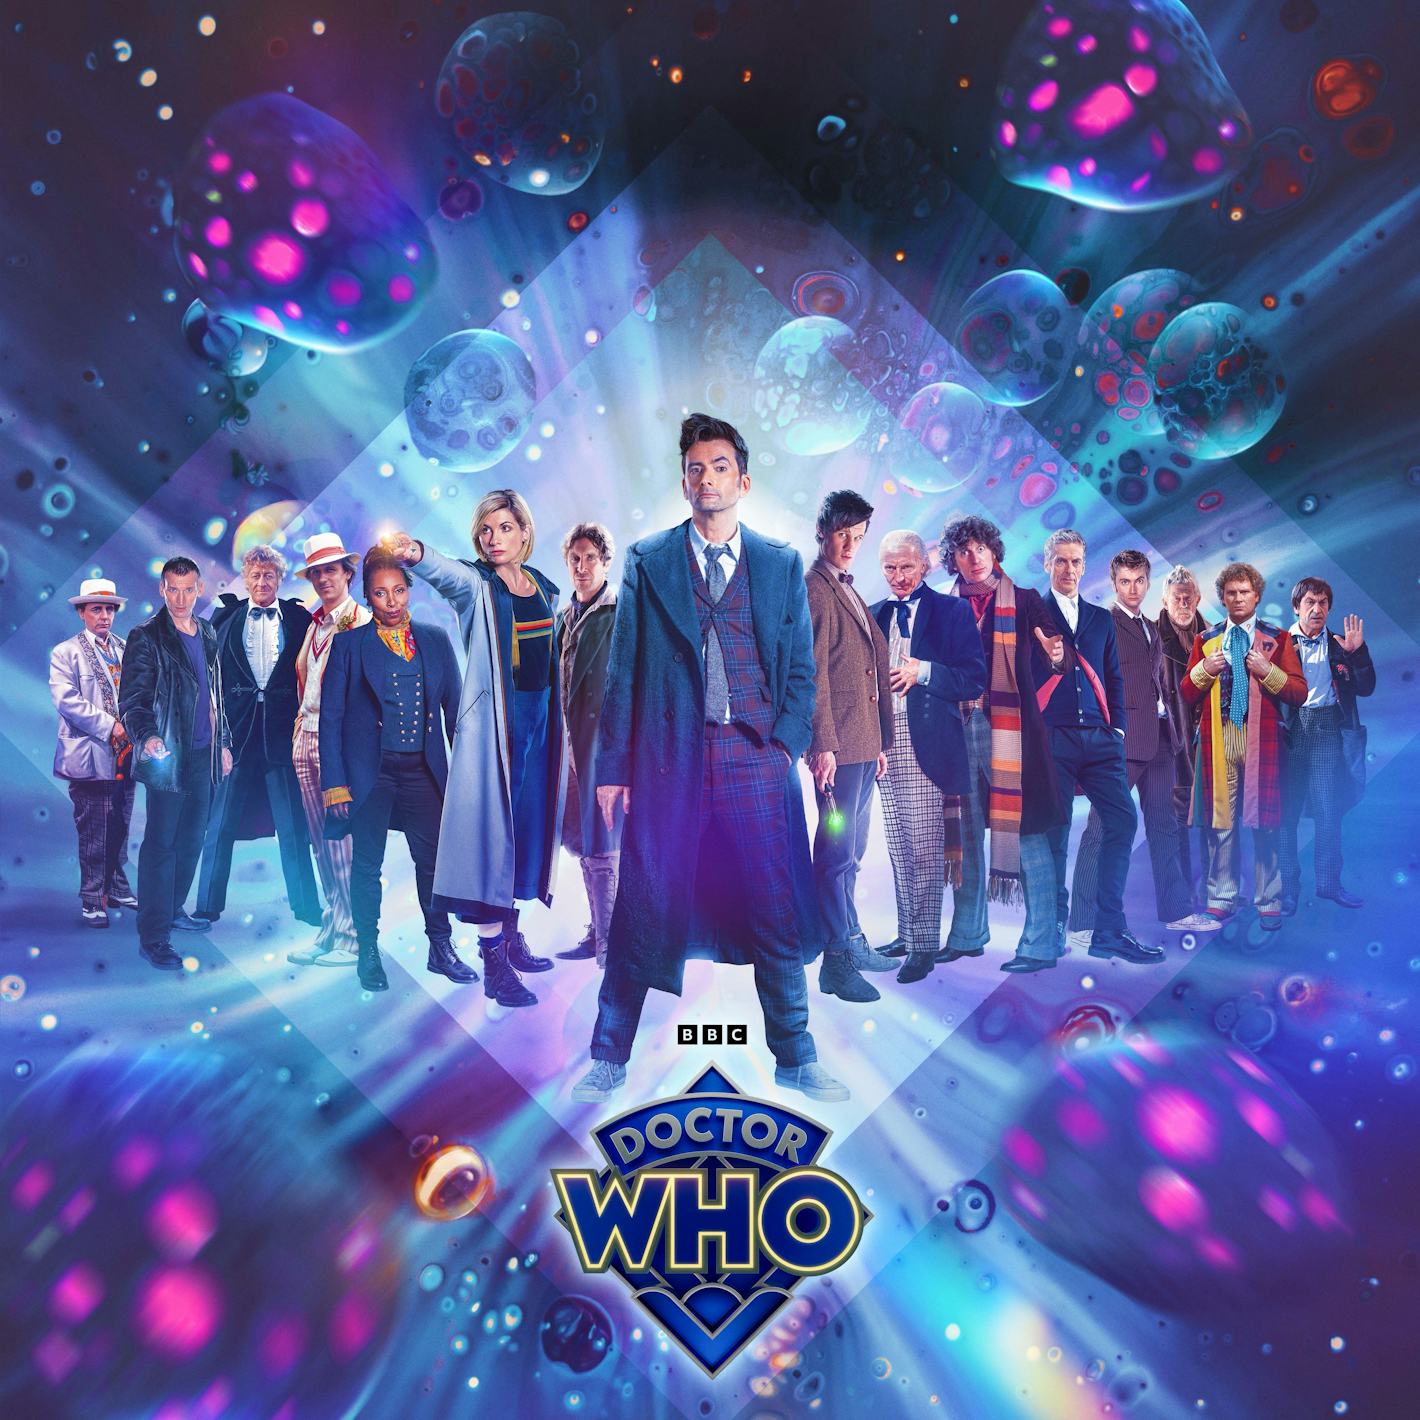 ‘Doctor Who’ 60th Anniversary release date, cast, and trailer for the